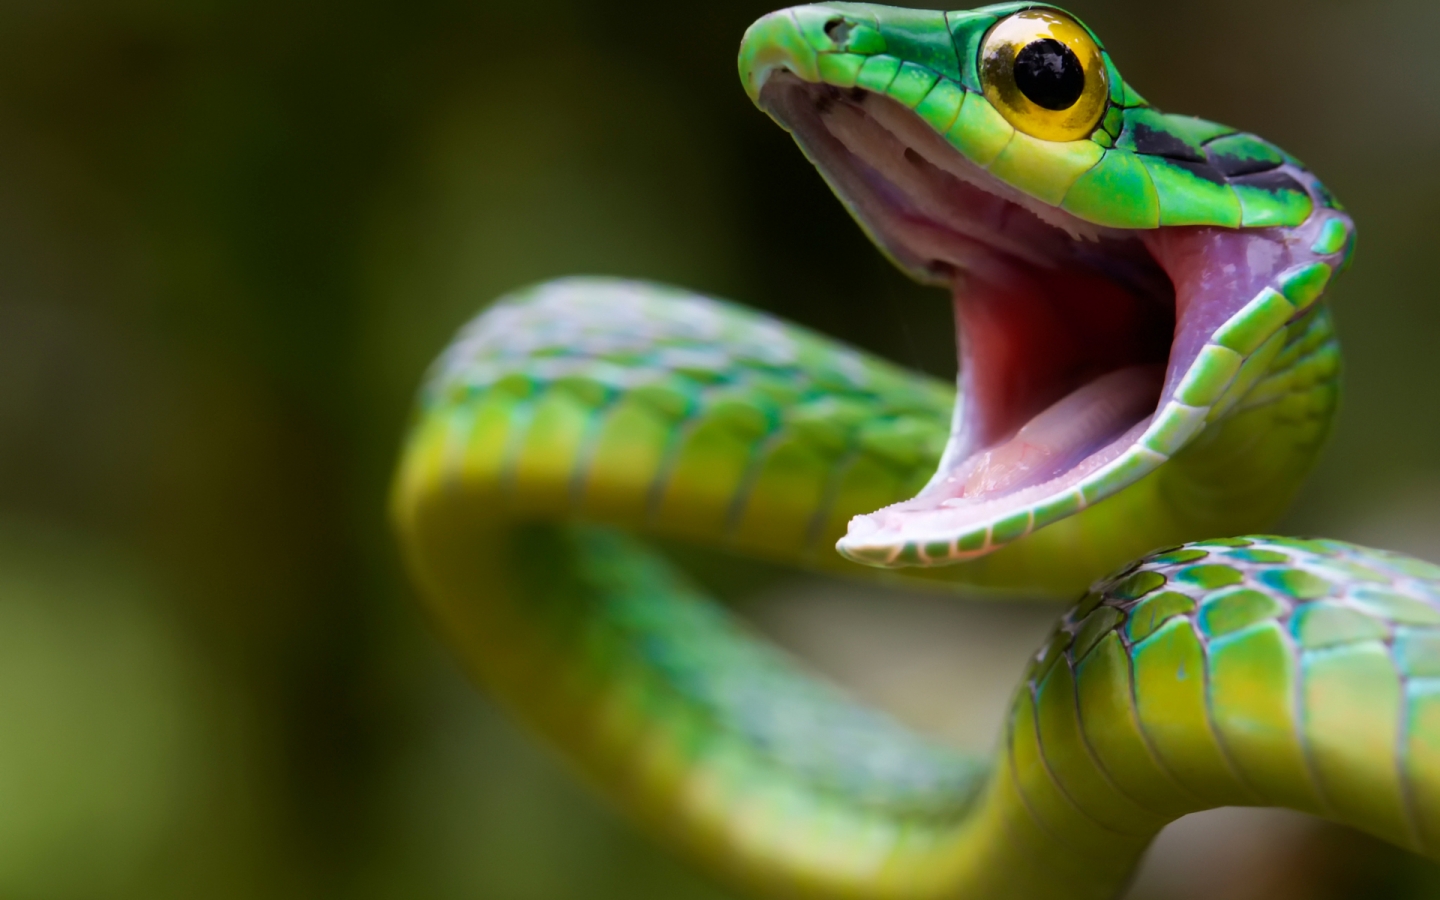 Green Snake Attack for 1440 x 900 widescreen resolution